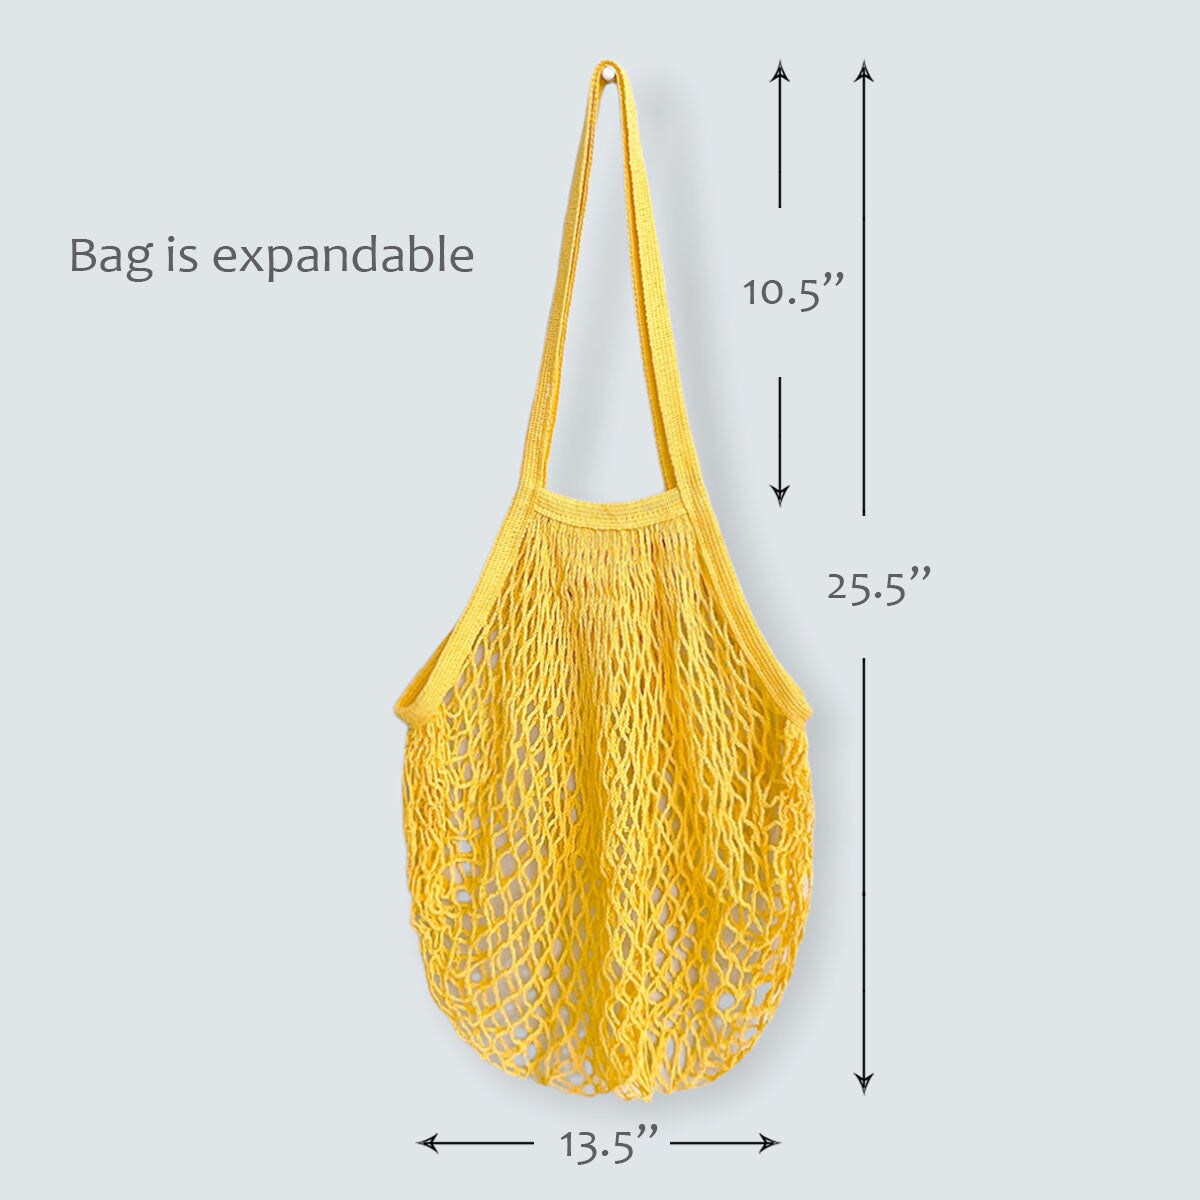 Wrapables Cotton Mesh Net Shopping Bag, Grocery Bag for Vegetables, Produce (Set of 3), Yellow, Blue, Hot Pink